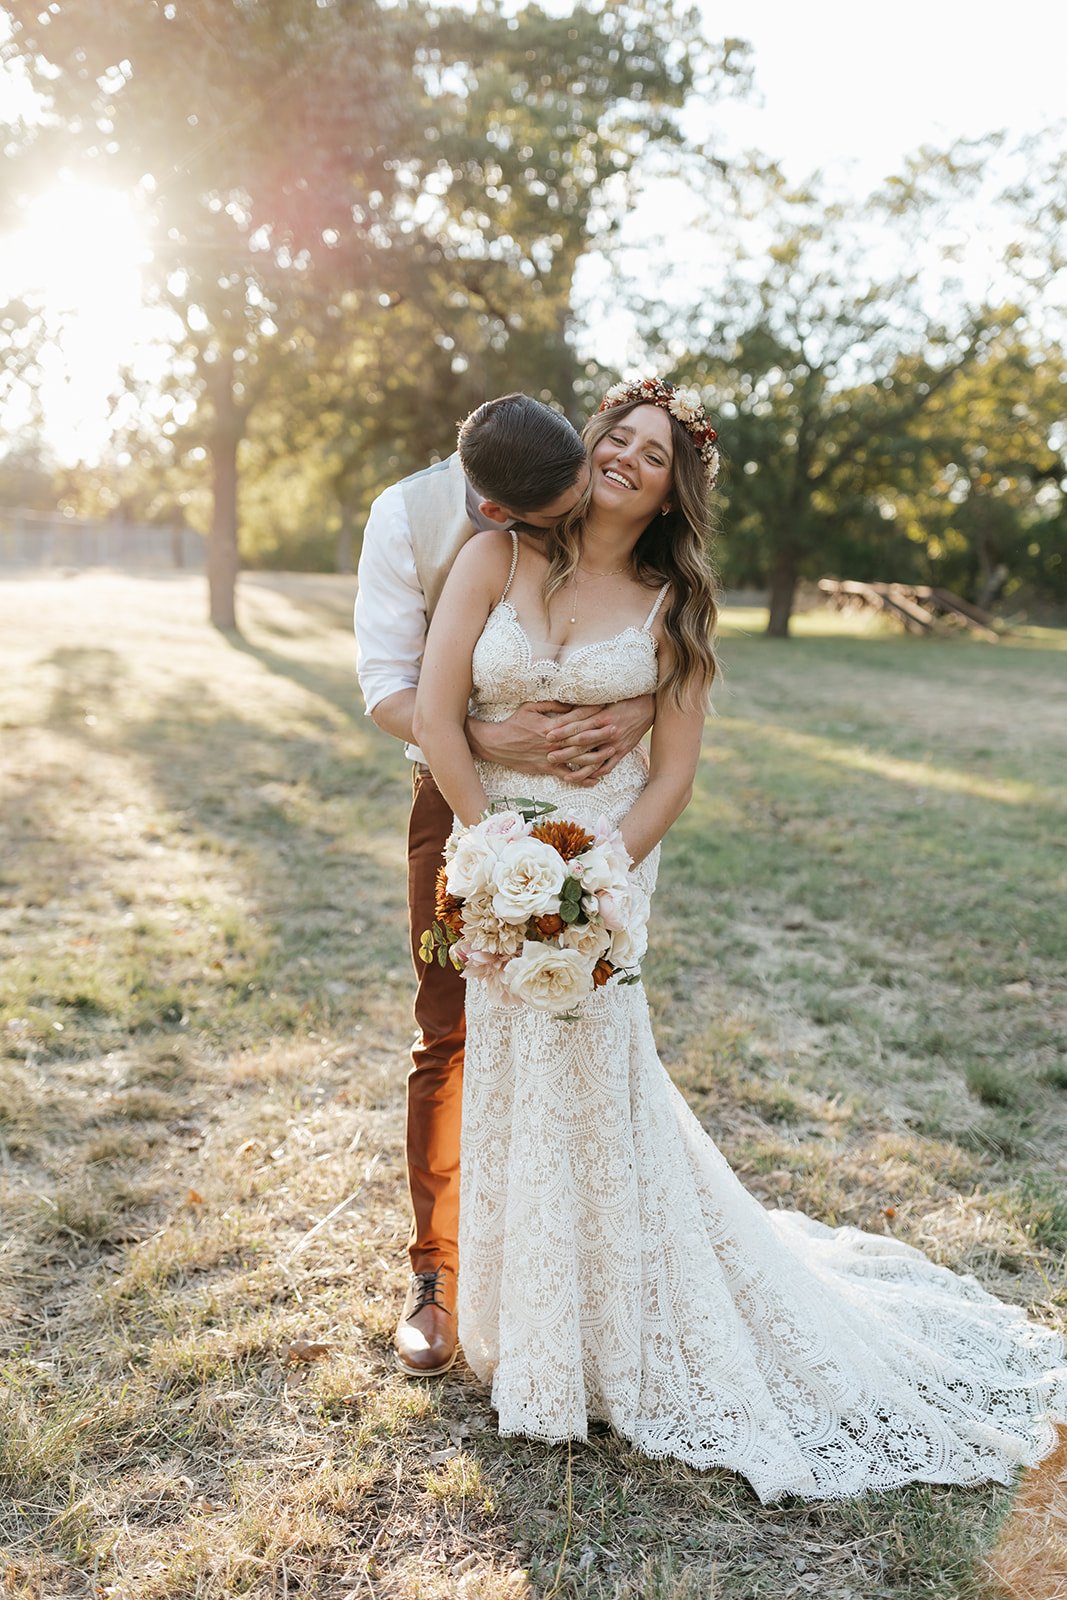 These wedding portraits with the golden light coming through the trees are truly swoon-worthy